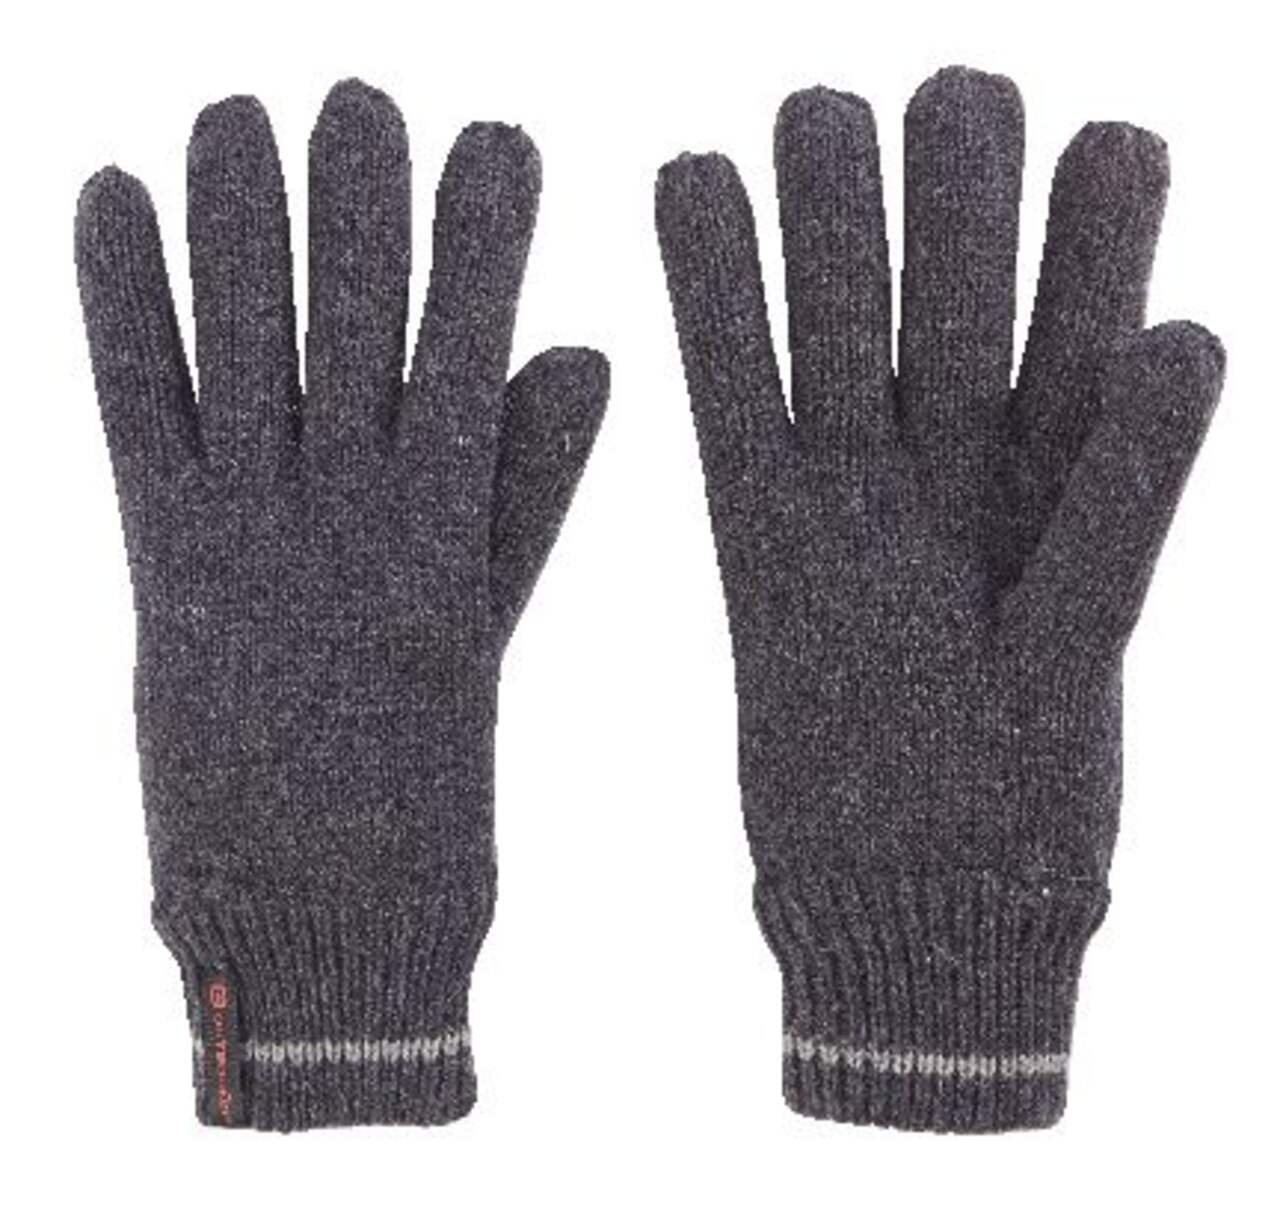 https://media-www.canadiantire.ca/product/playing/footwear-apparel/winter-footwear-apparel/1871192/outbound-glv-wool-thinsulate-glove-m-s-m-9579fe7a-b419-4a65-b0f7-9d8d3a902c6d-jpgrendition.jpg?imdensity=1&imwidth=1244&impolicy=mZoom